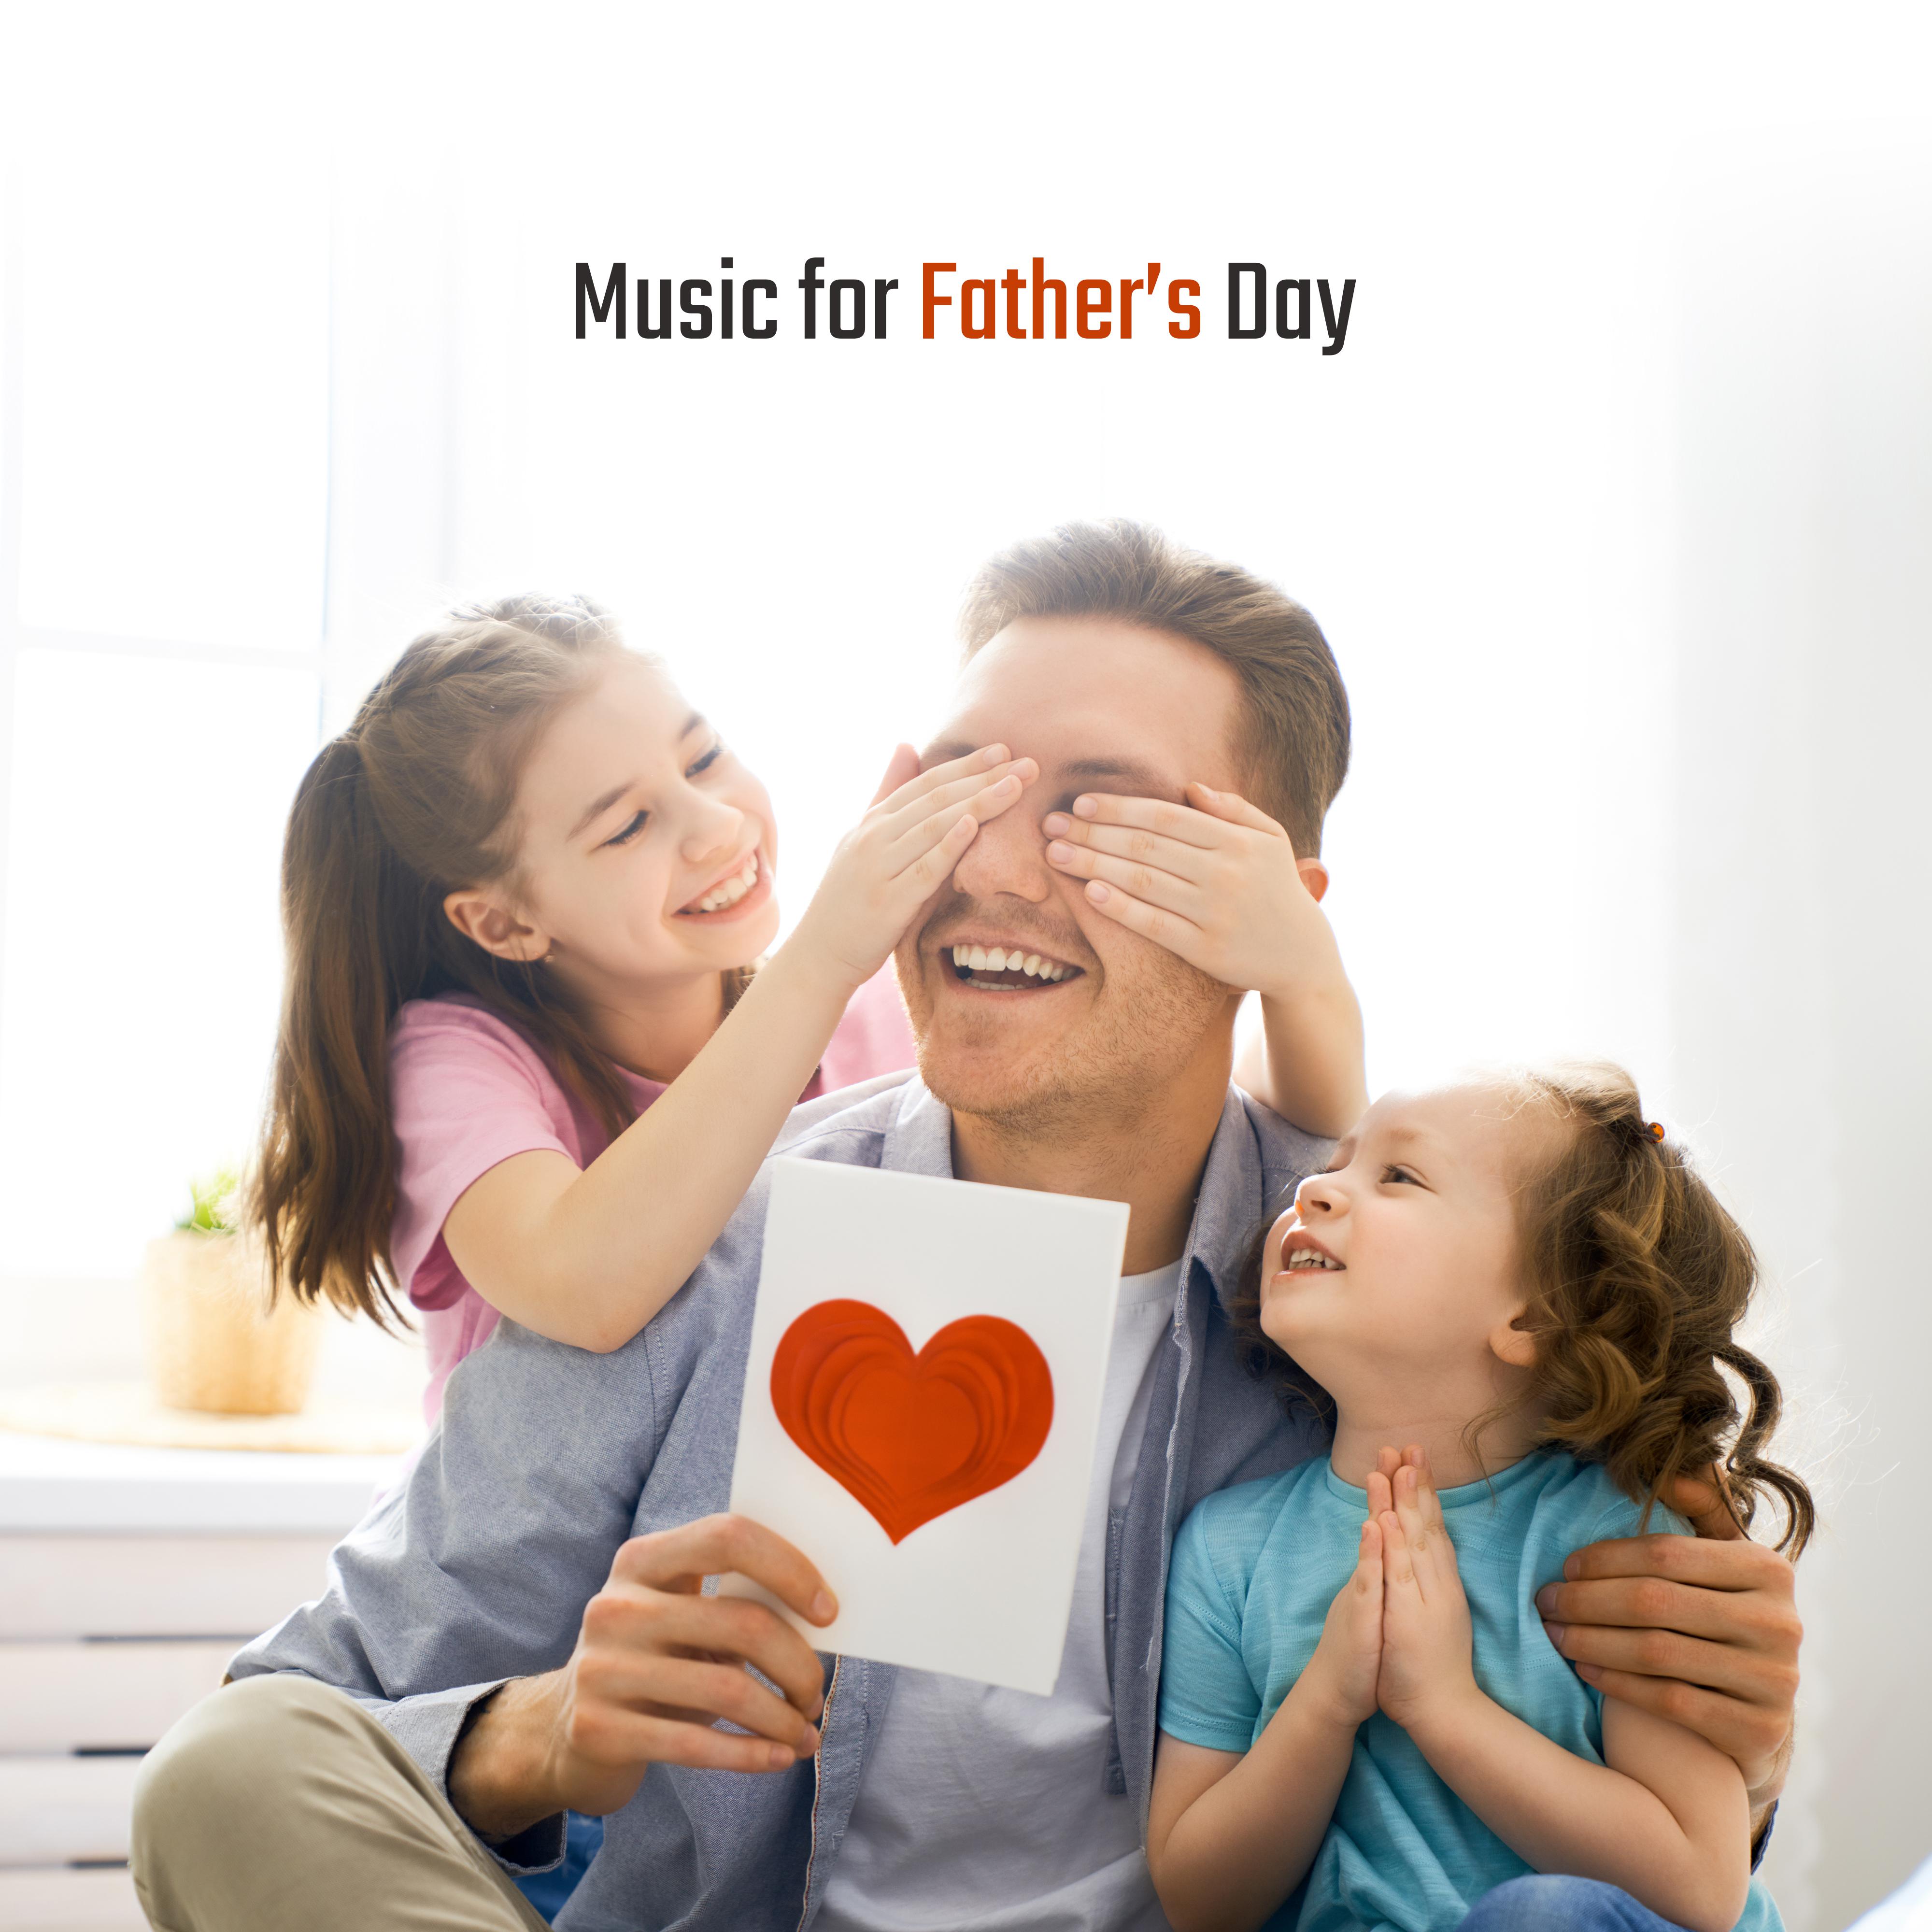 Music for Father’s Day – Soothing Sounds for Deep Relaxation, Calm Sleep, Rest & Massage, Reduce Stress, Zen